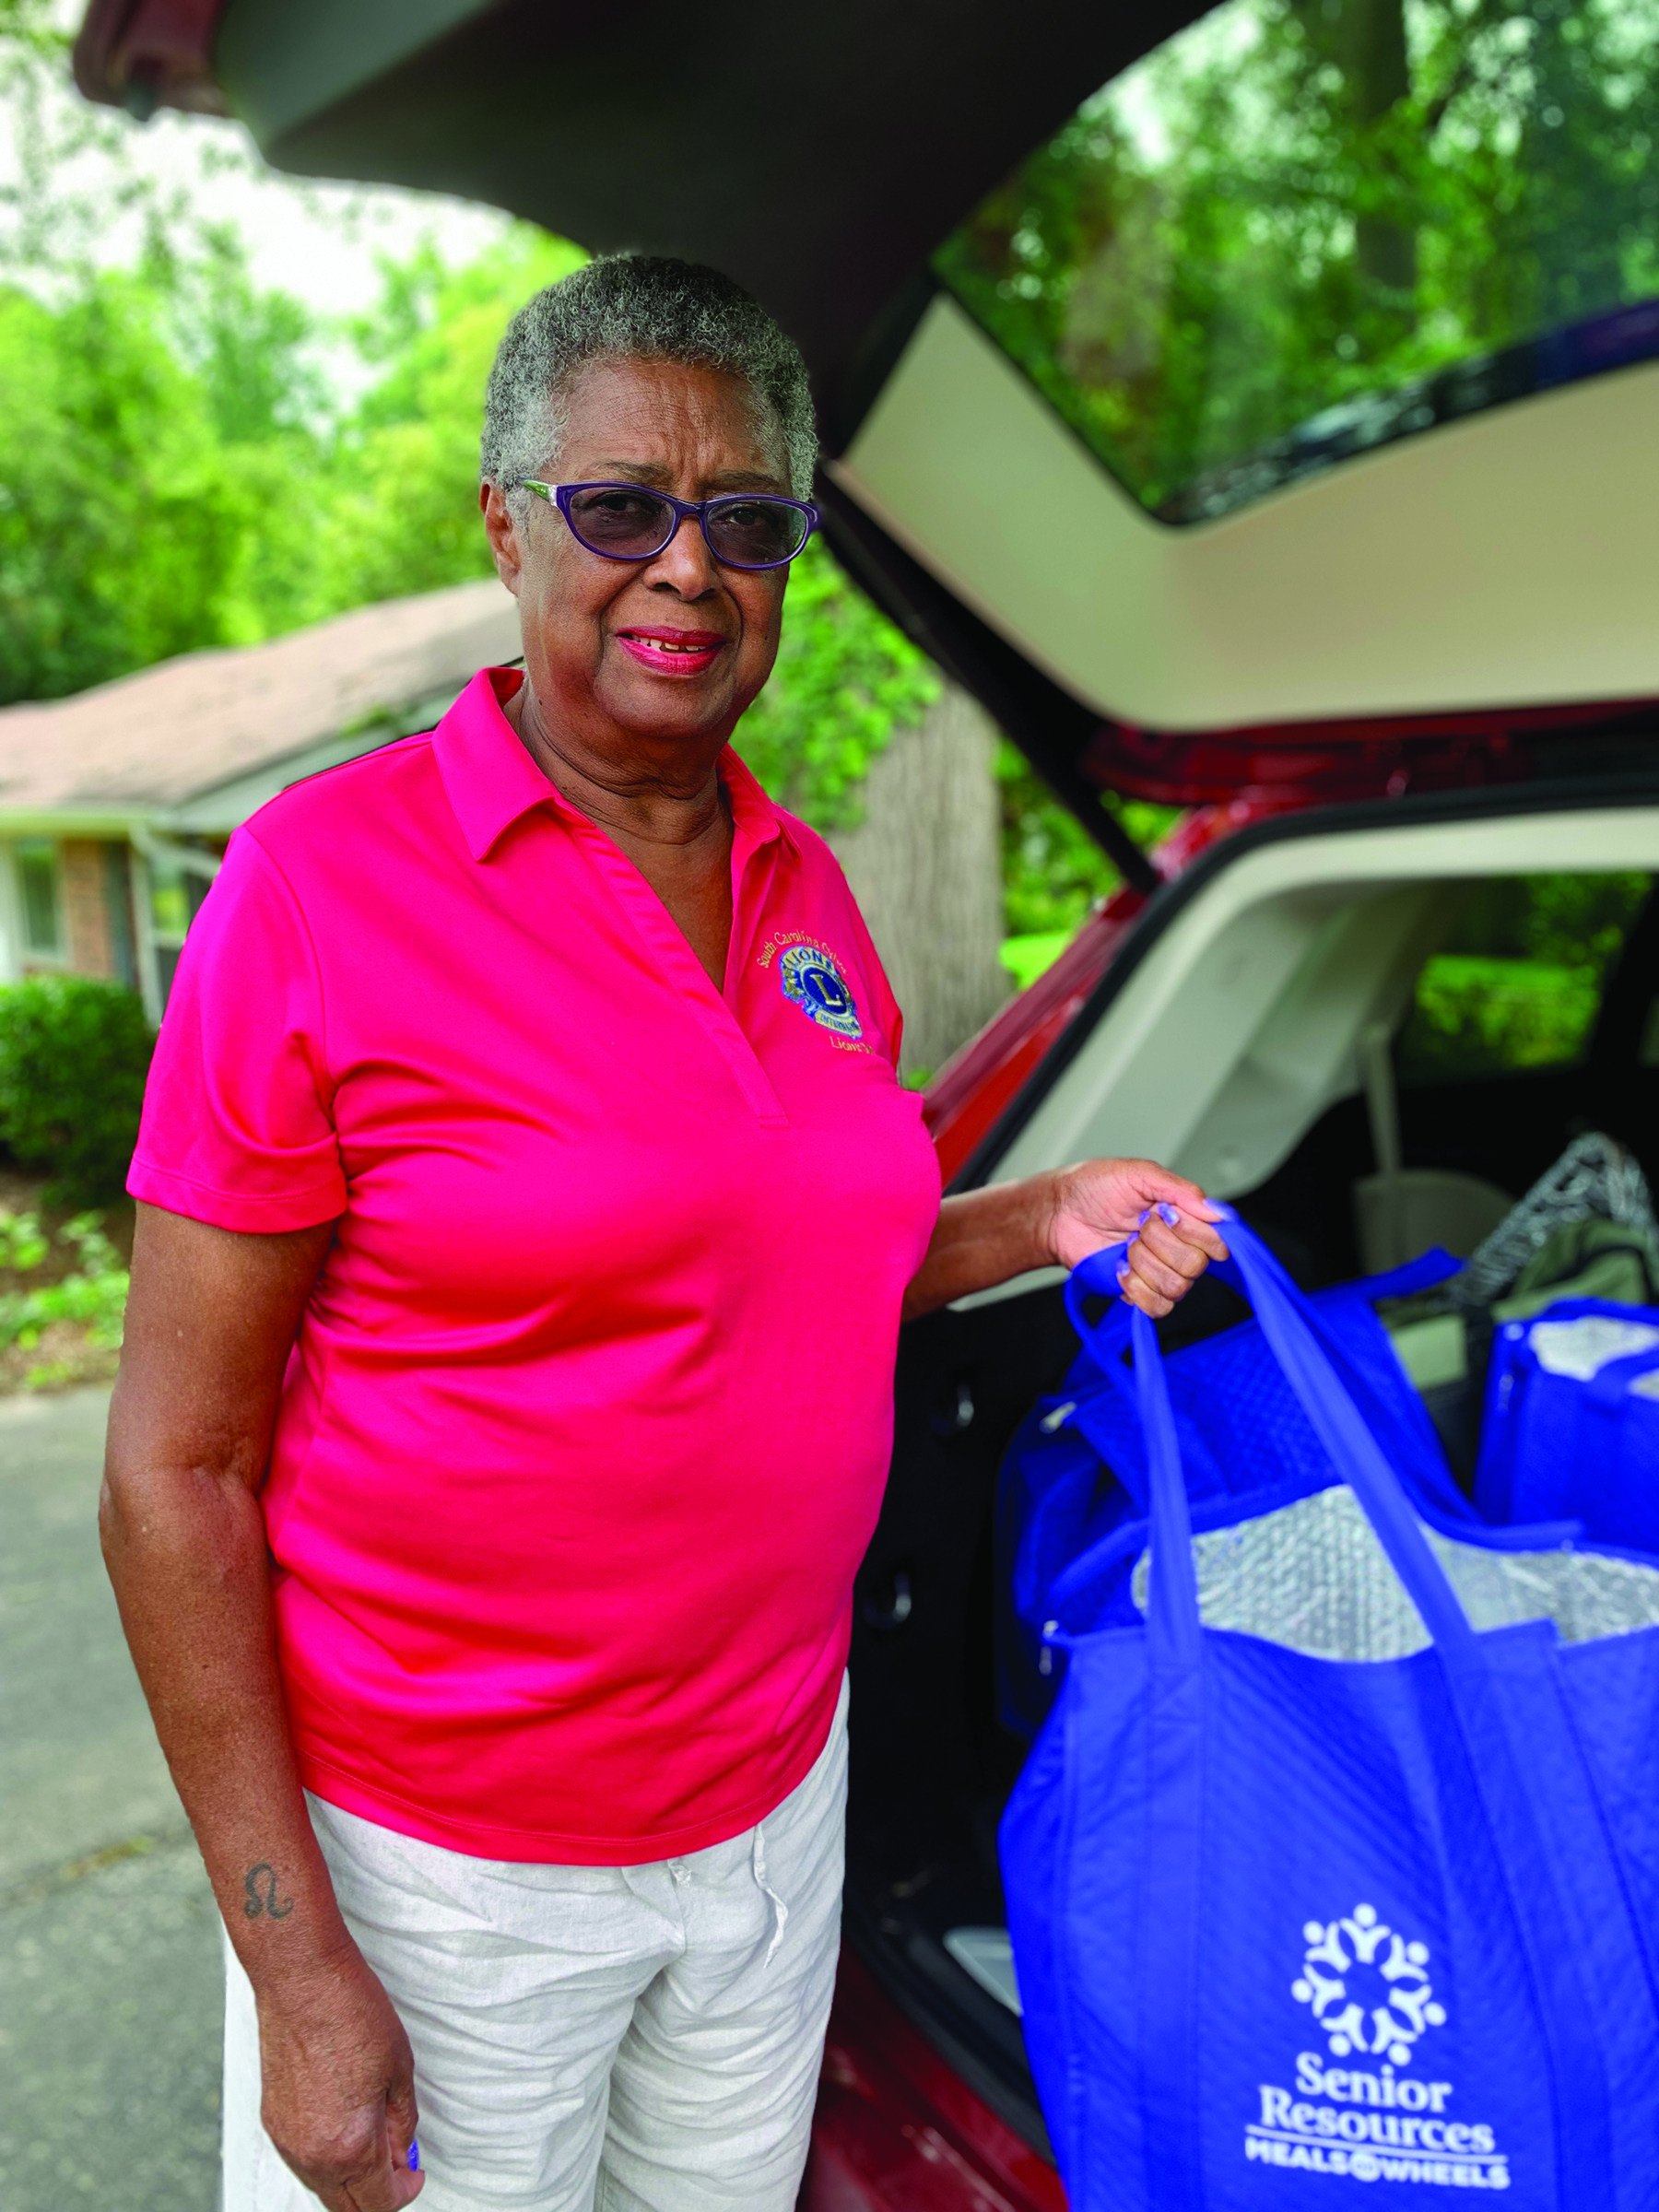 Meals On Wheels Volunteer, Judy Scott, living a life of service to help others